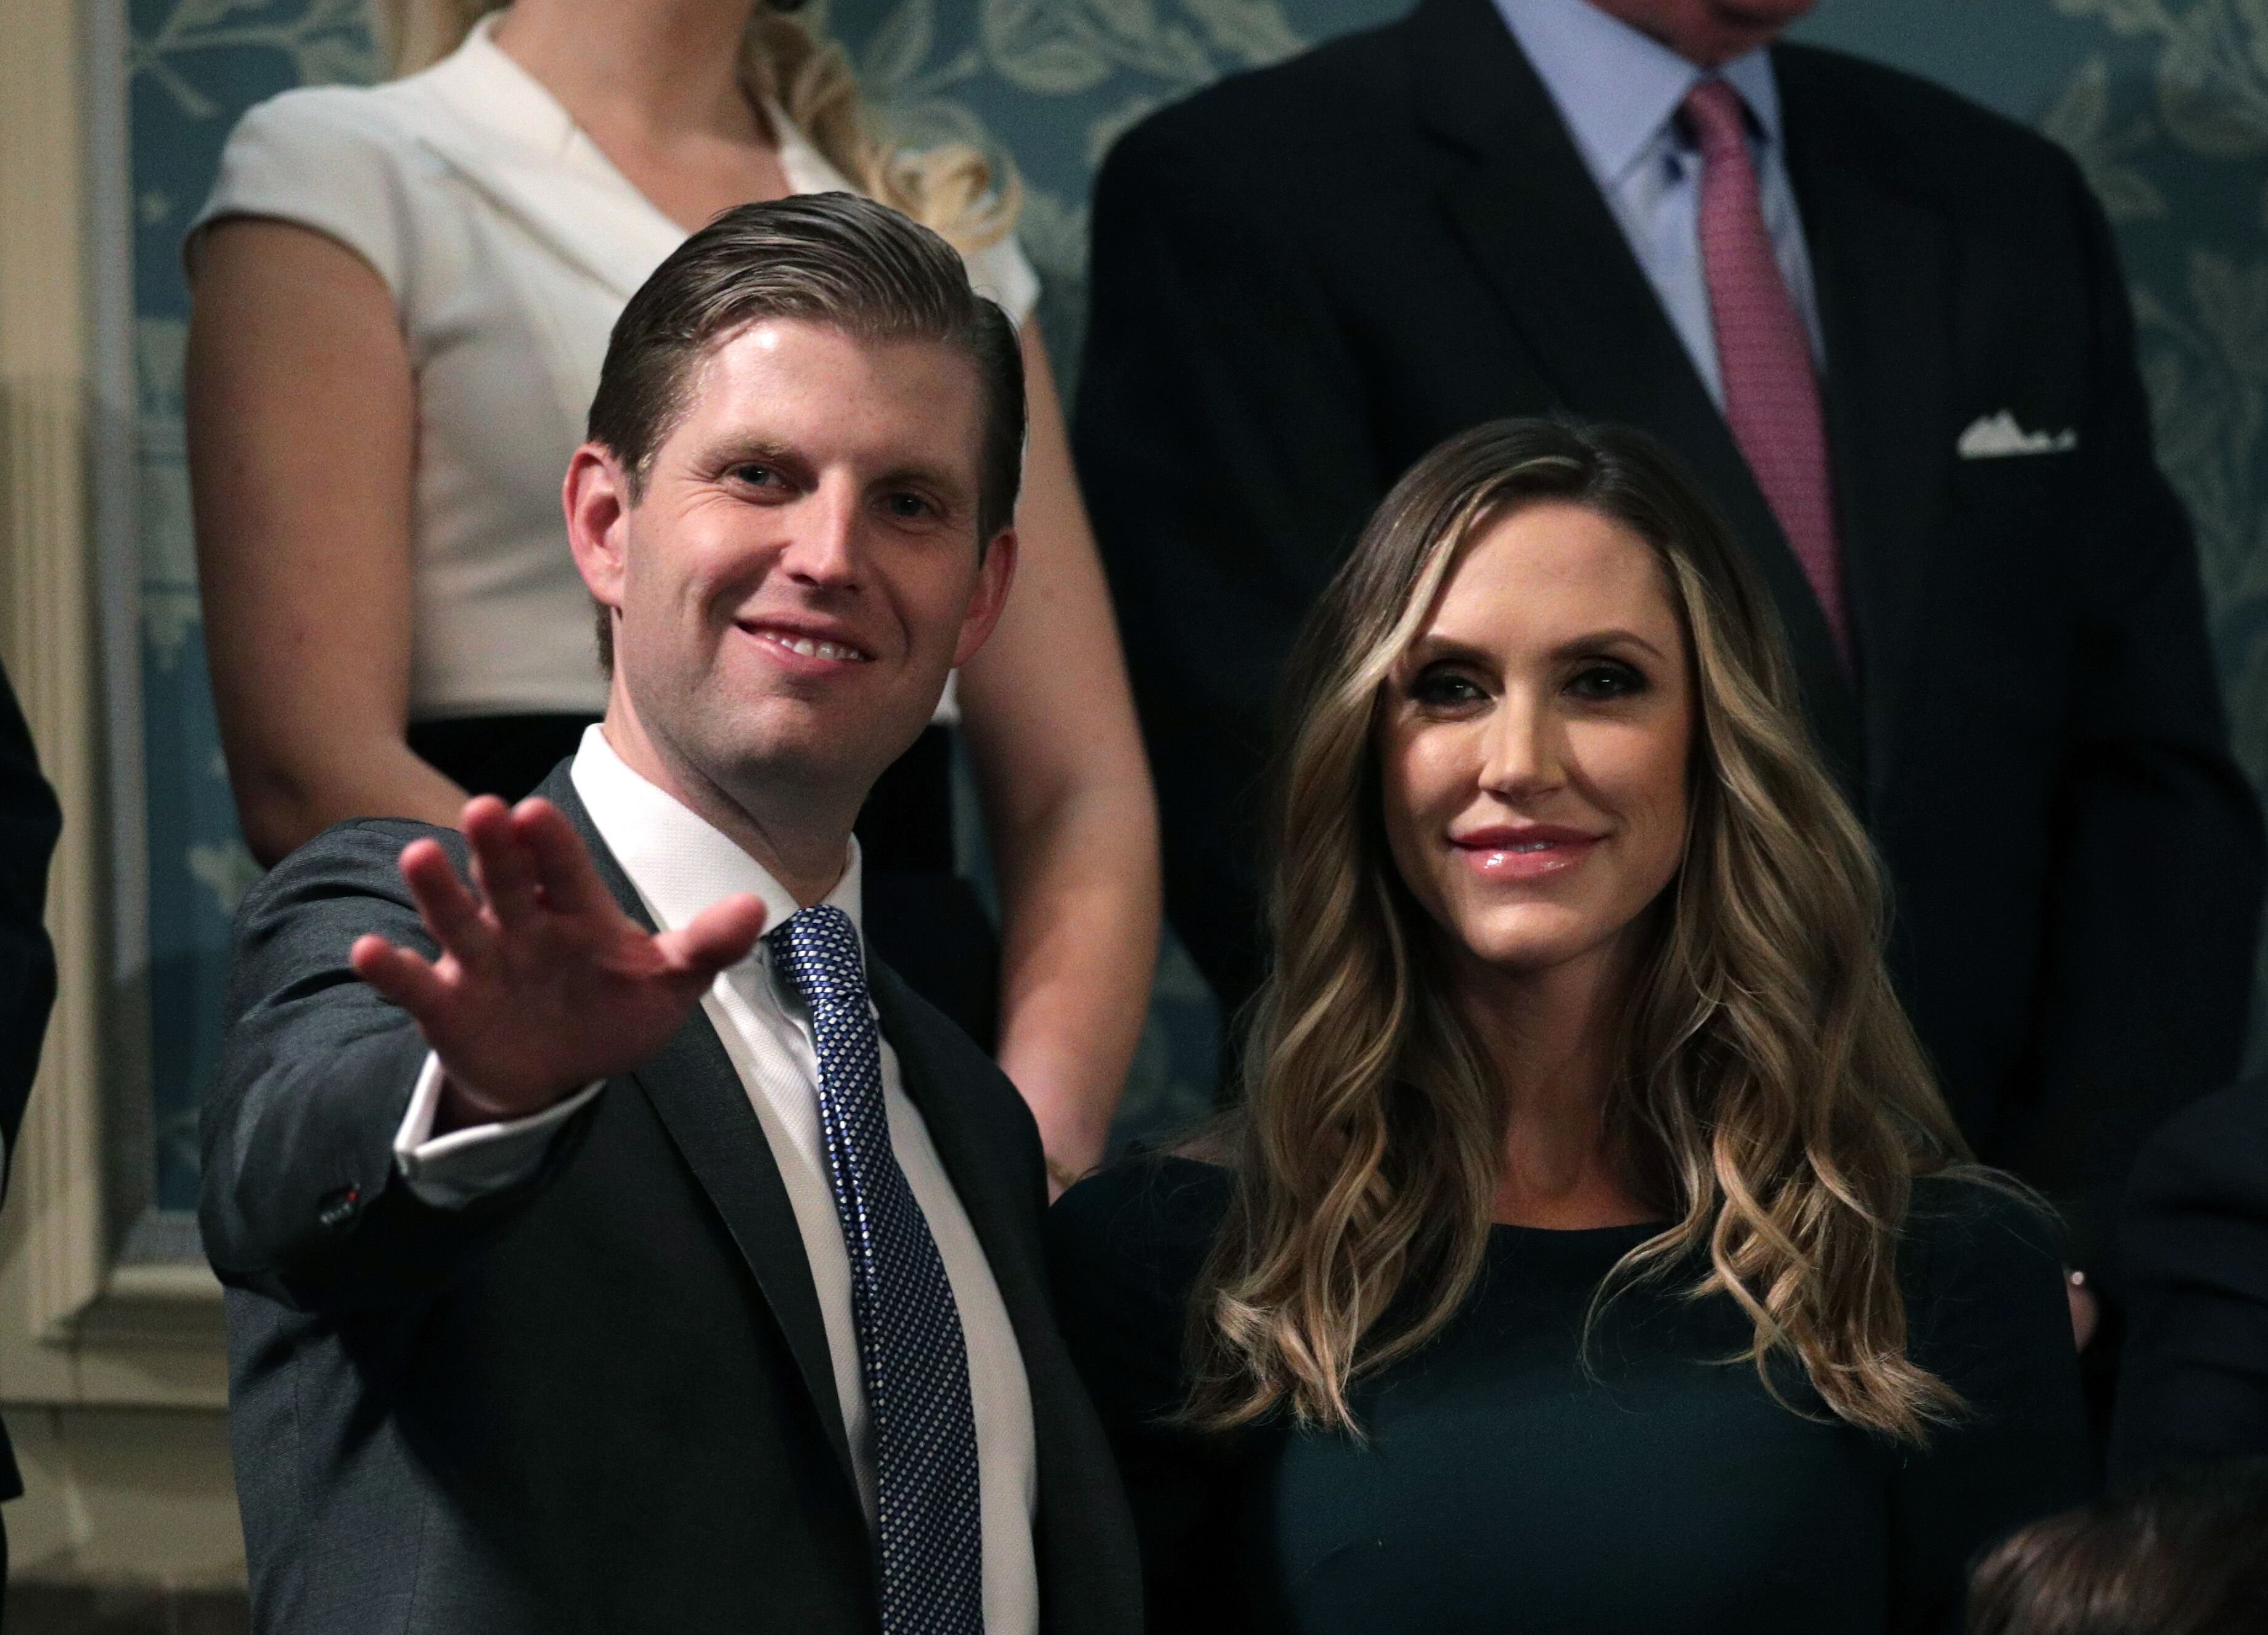 Eric Trump and Lara Trump at the State of the Union address on January 30, 2018. | Source: Getty Images